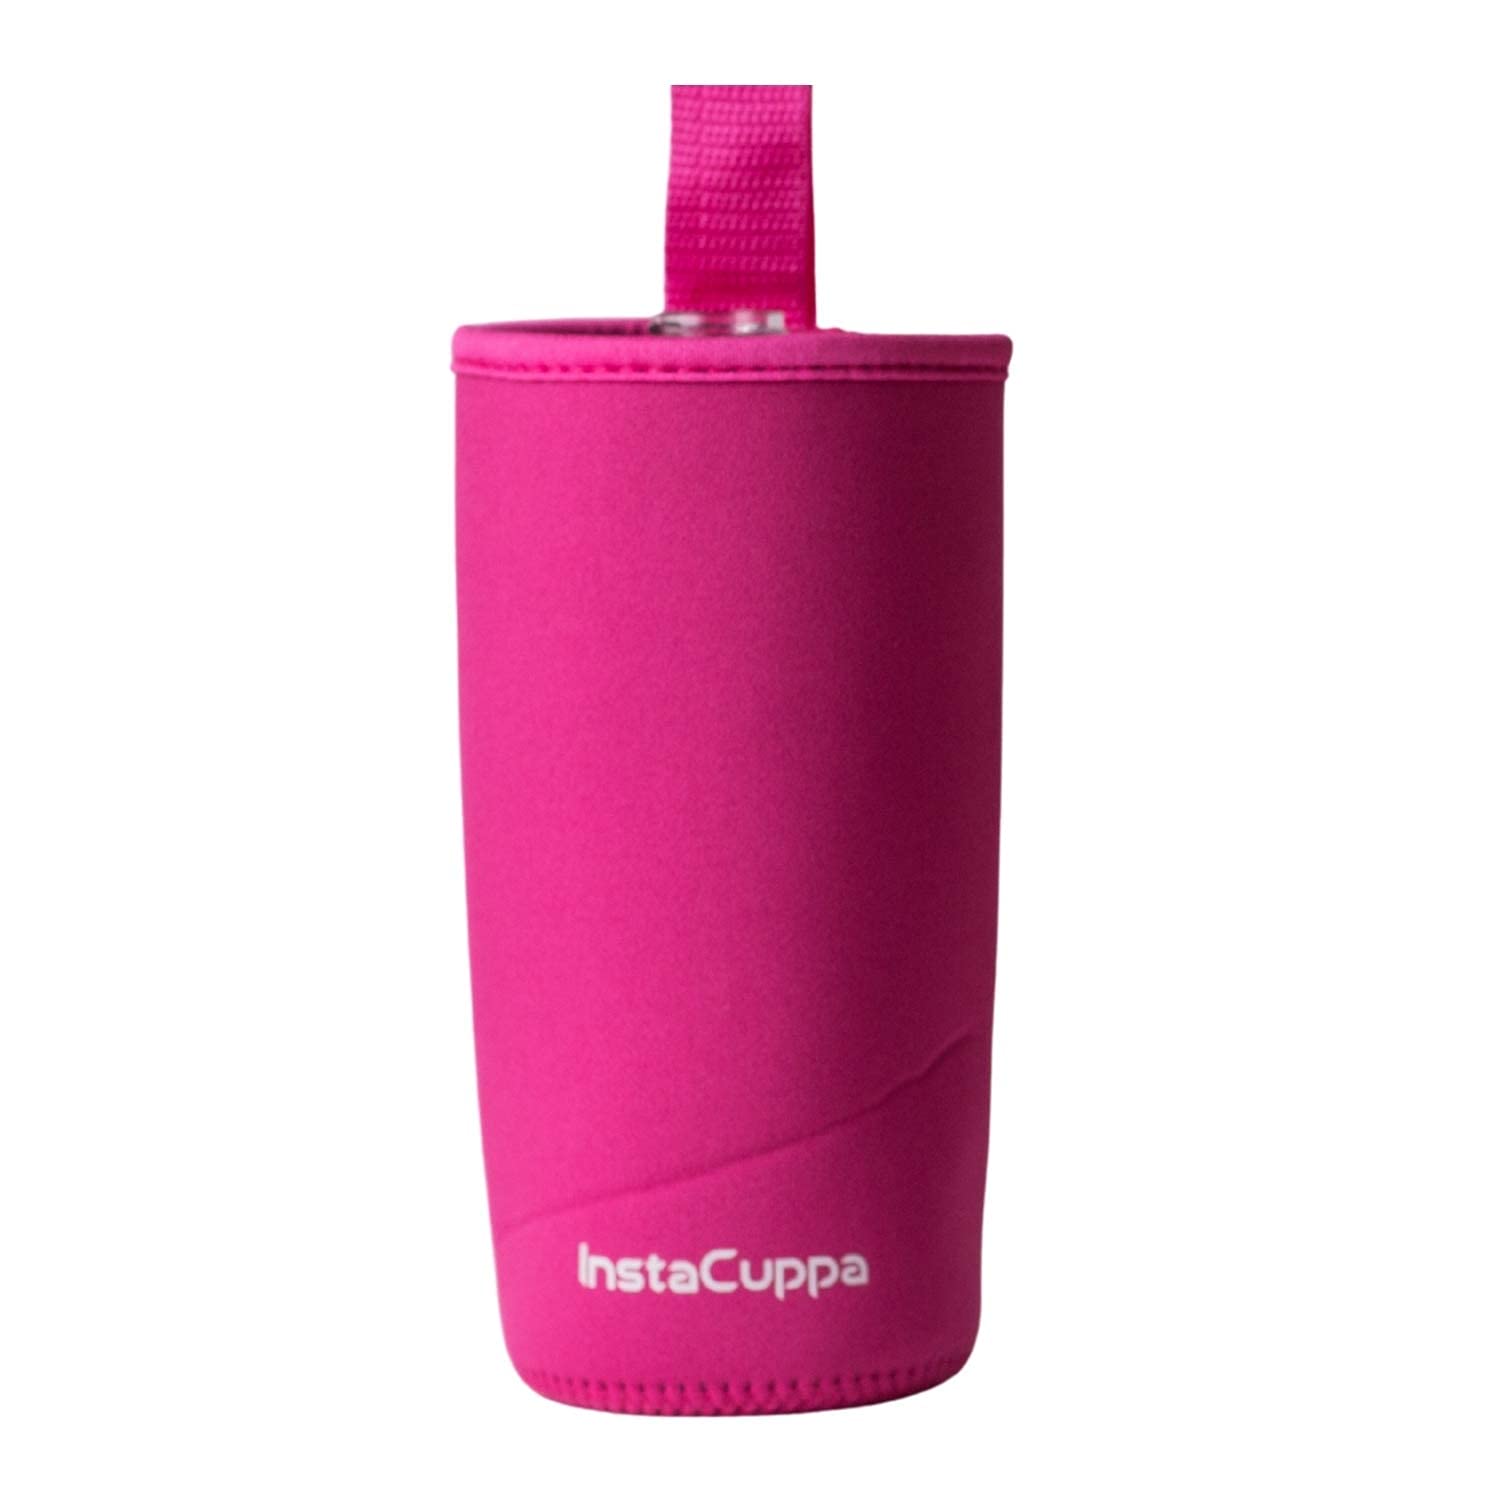 InstaCuppa Neoprene Silicone Sleeve Add on for Glass Bottle 650 ML/100 –  InstaCuppa Store